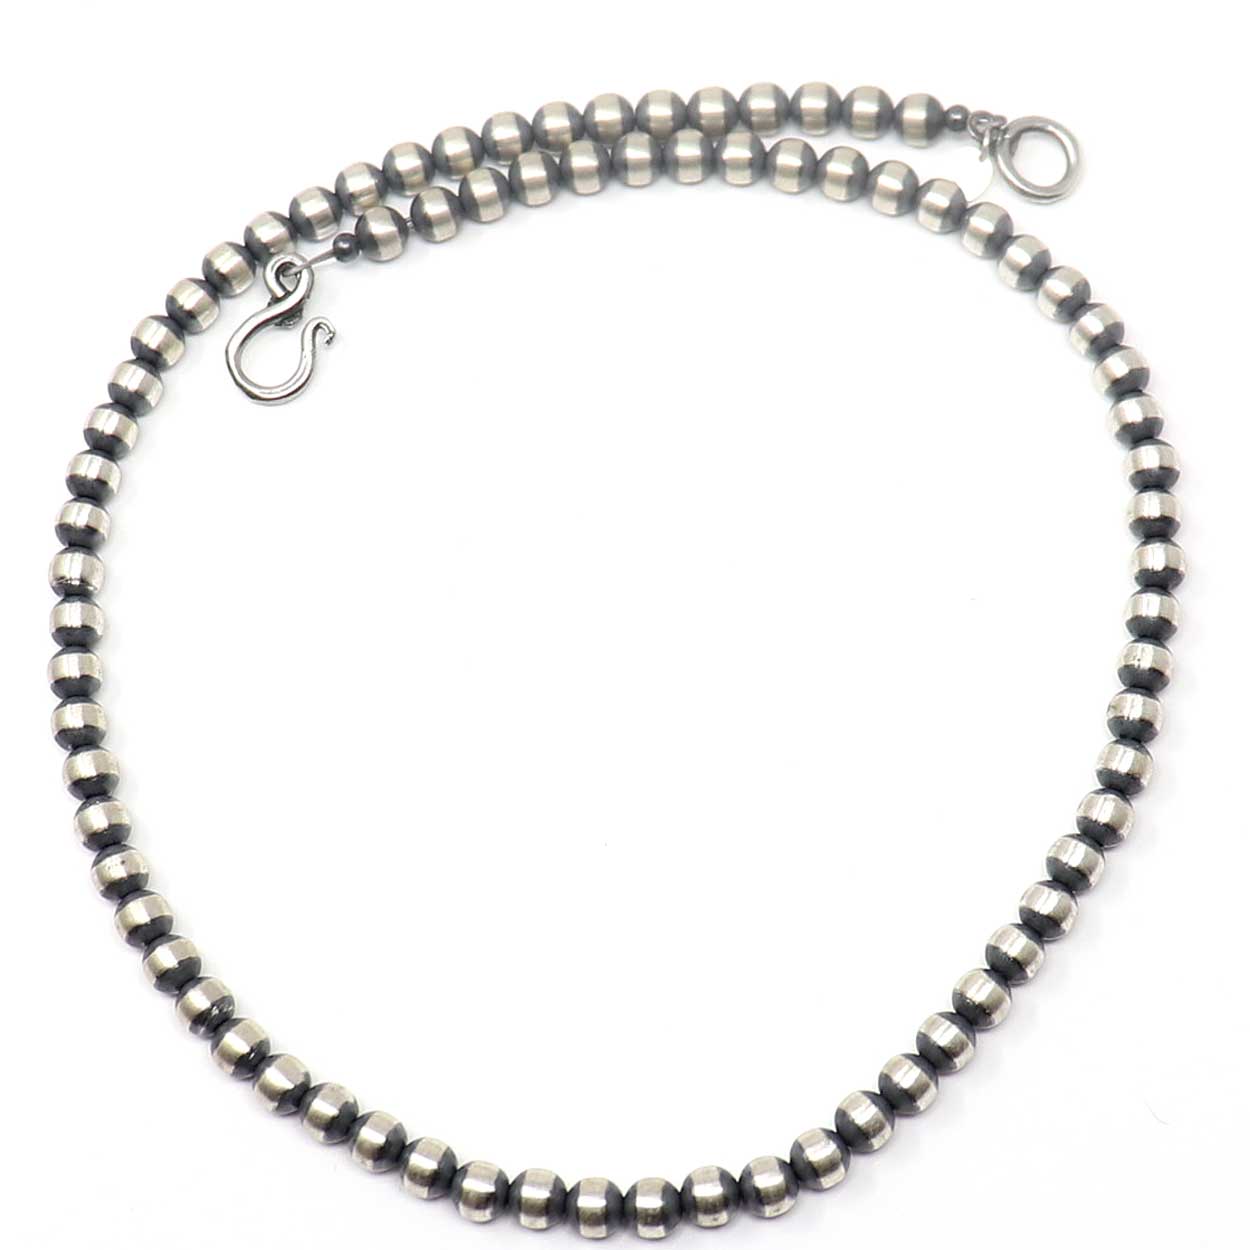 20" 6 mm Sterling Silver Pearls